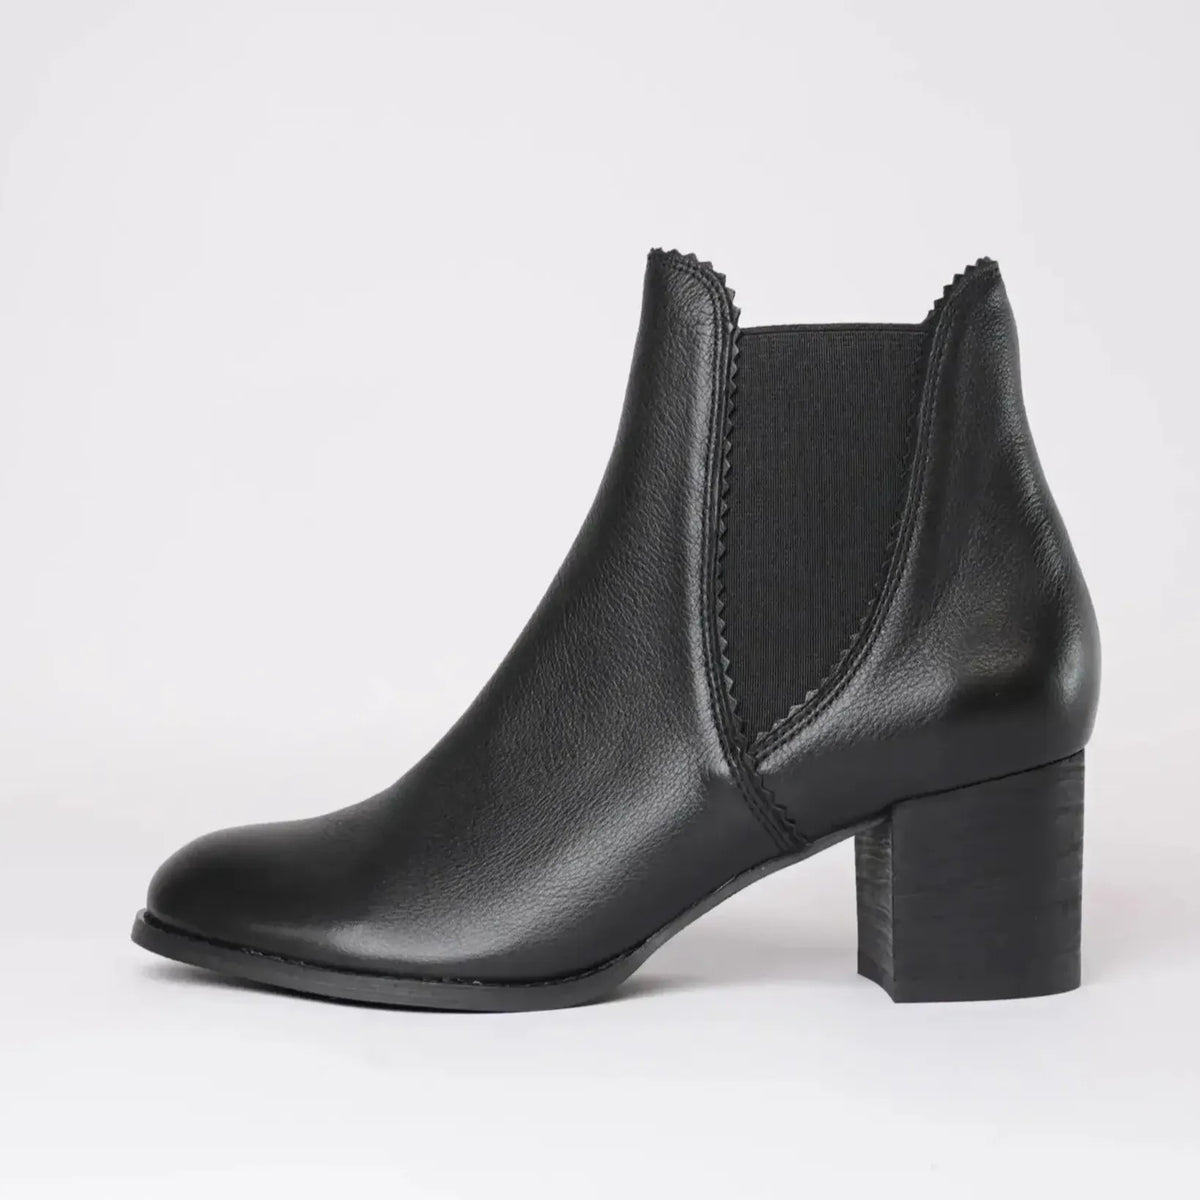 Sadore Black/Black Leather Ankle Boots